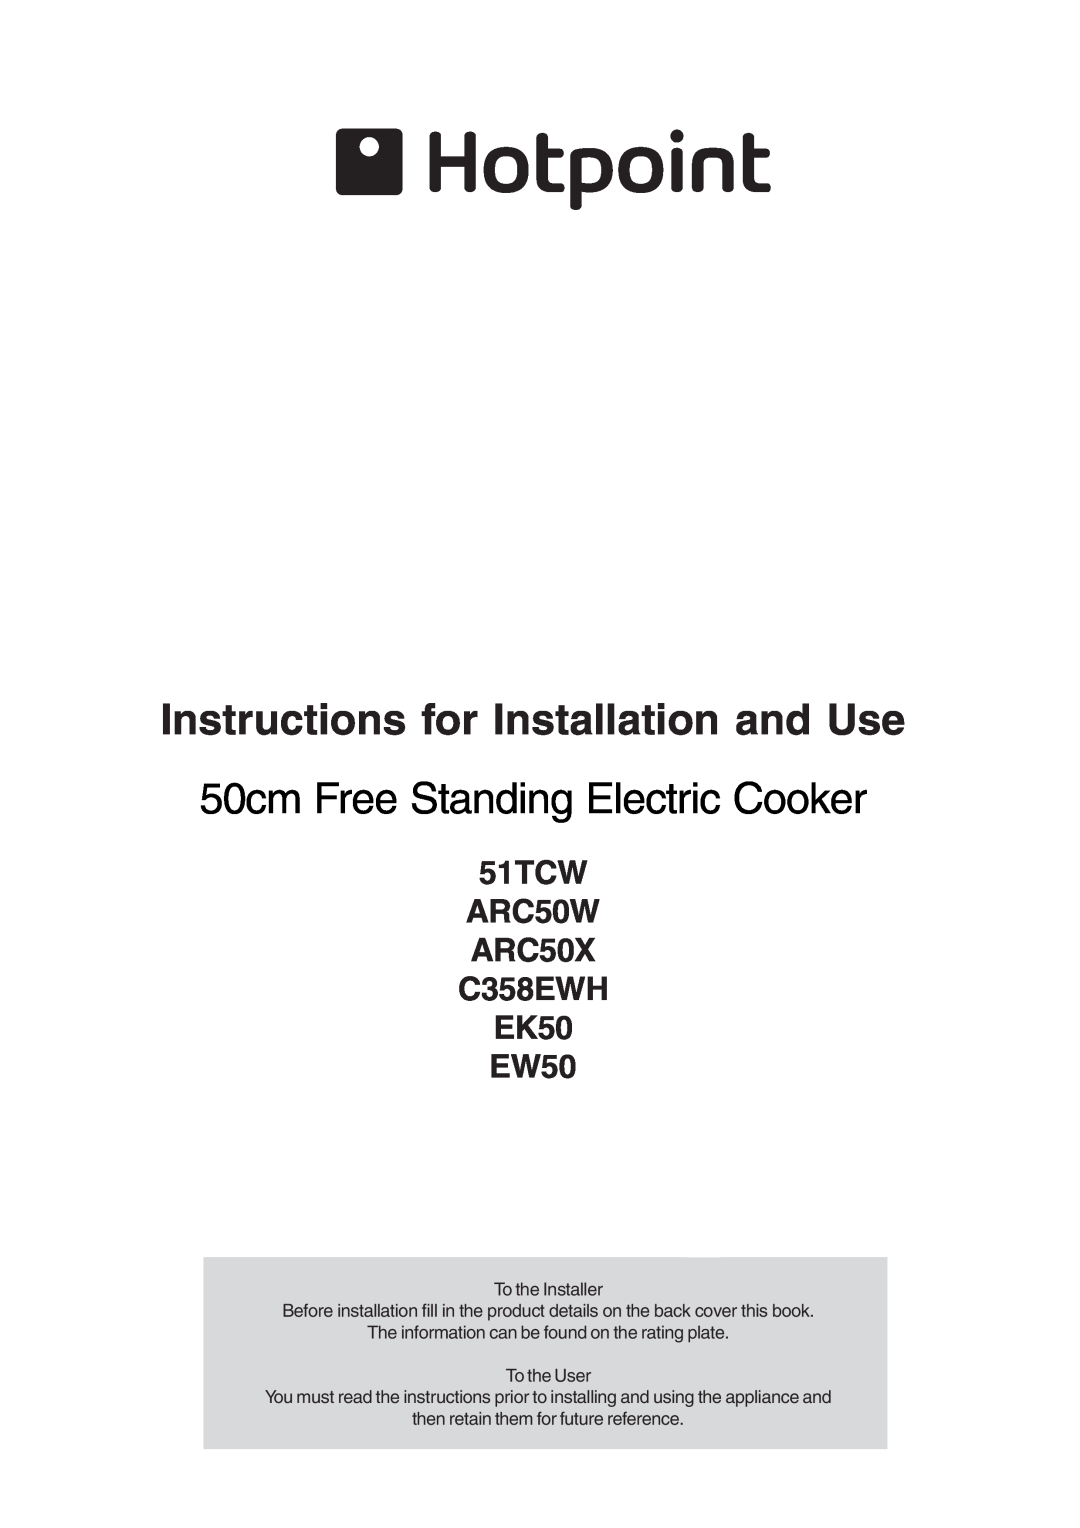 Hotpoint manual 51TCW ARC50W ARC50X C358EWH EK50 EW50, Instructions for Installation and Use, To the Installer 